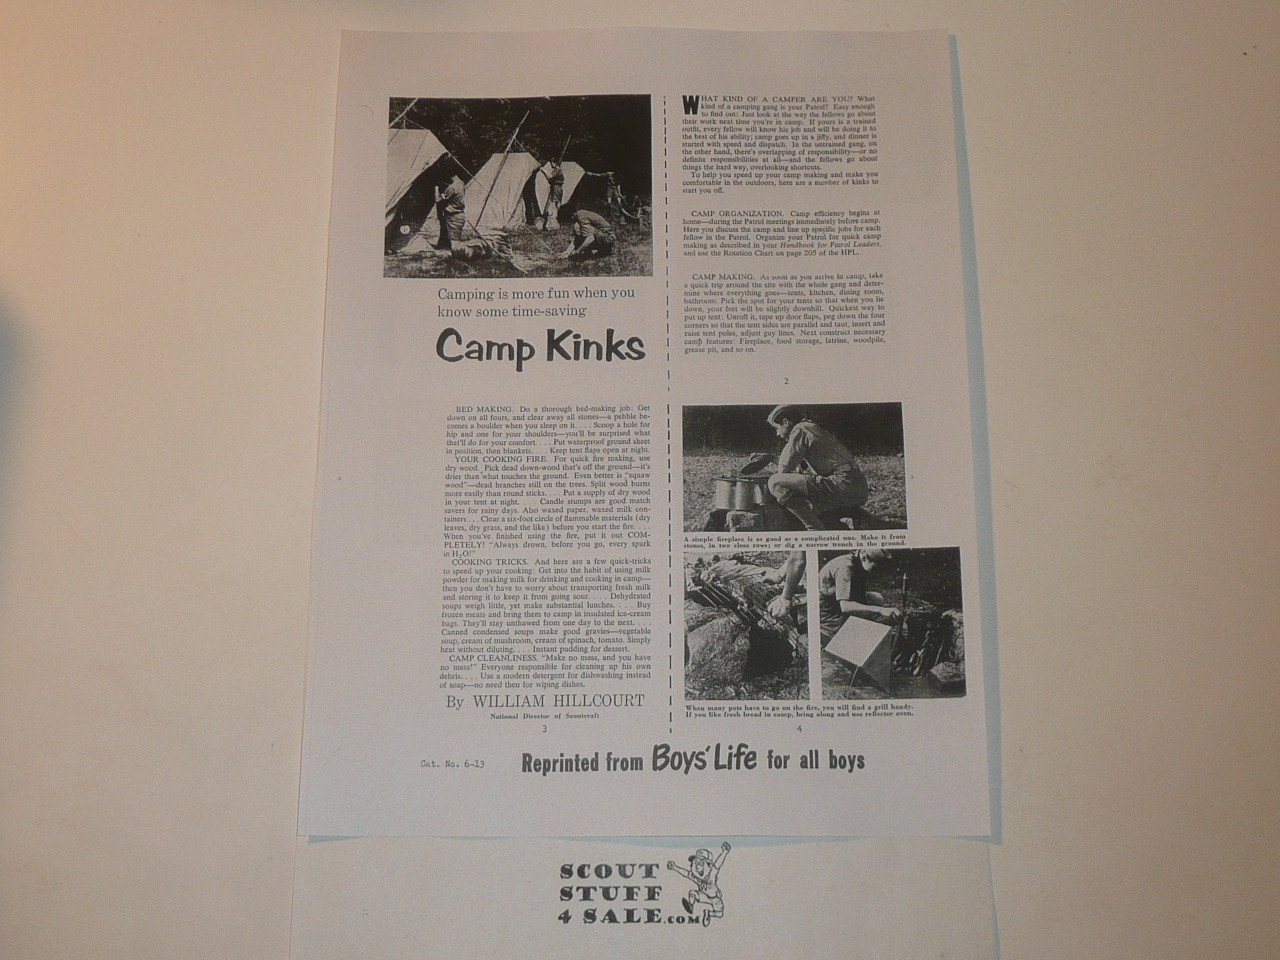 Camp Kinks, By Green Bar Bill, Boys' Life Single Topic Reprint from the 1950's - 1960's , written for Scouts, great teaching materials